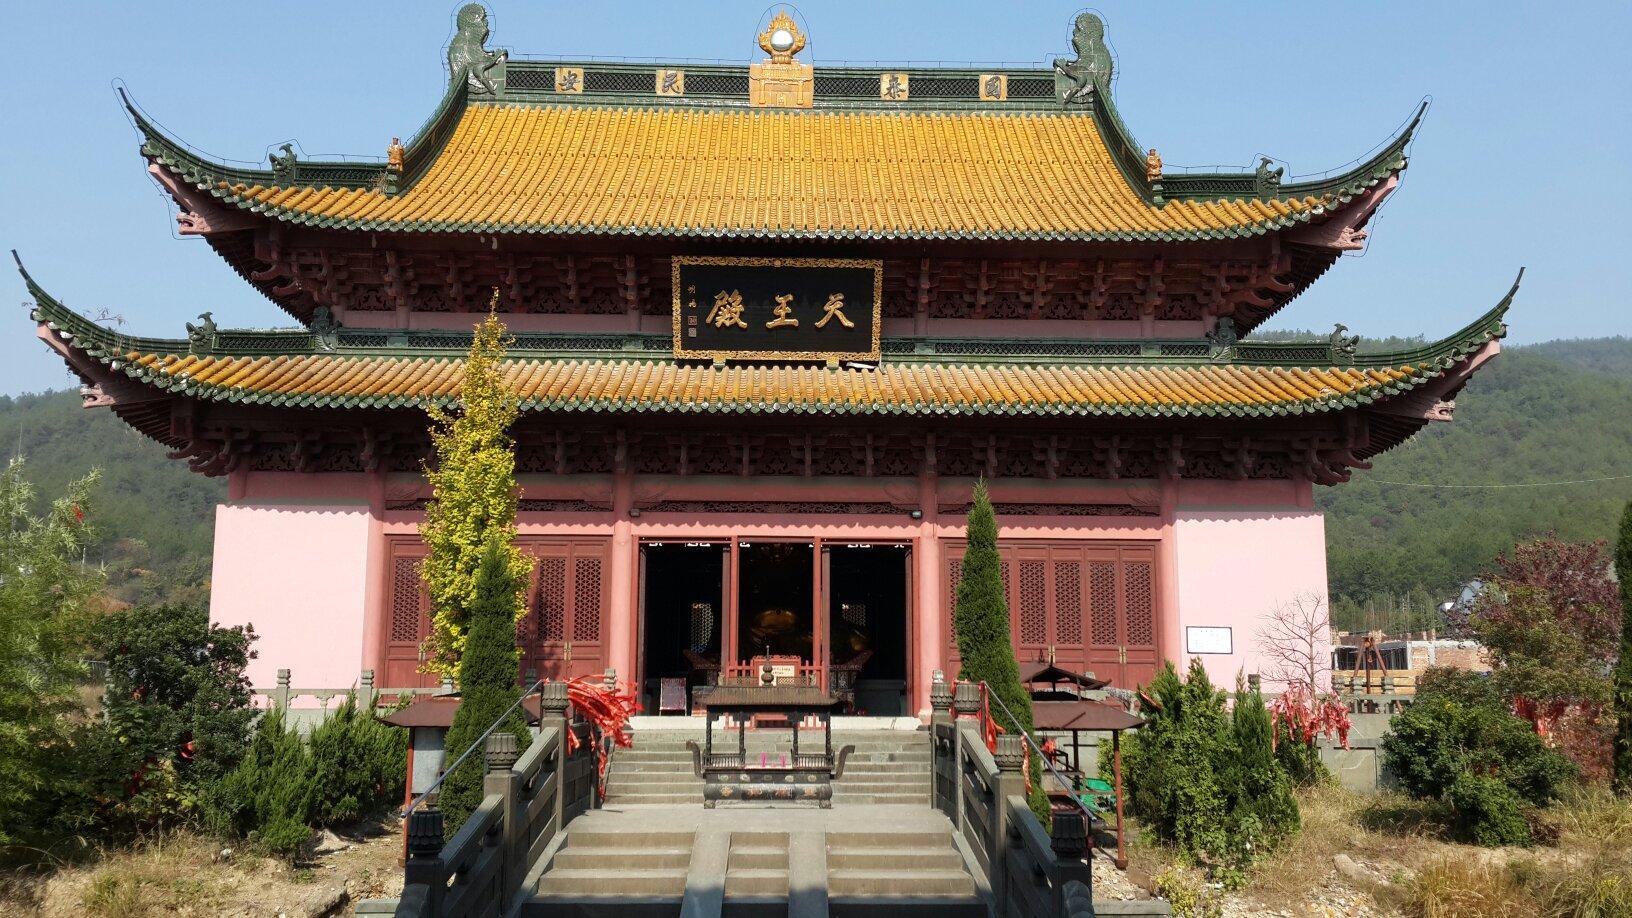 The Shuanglin Temple